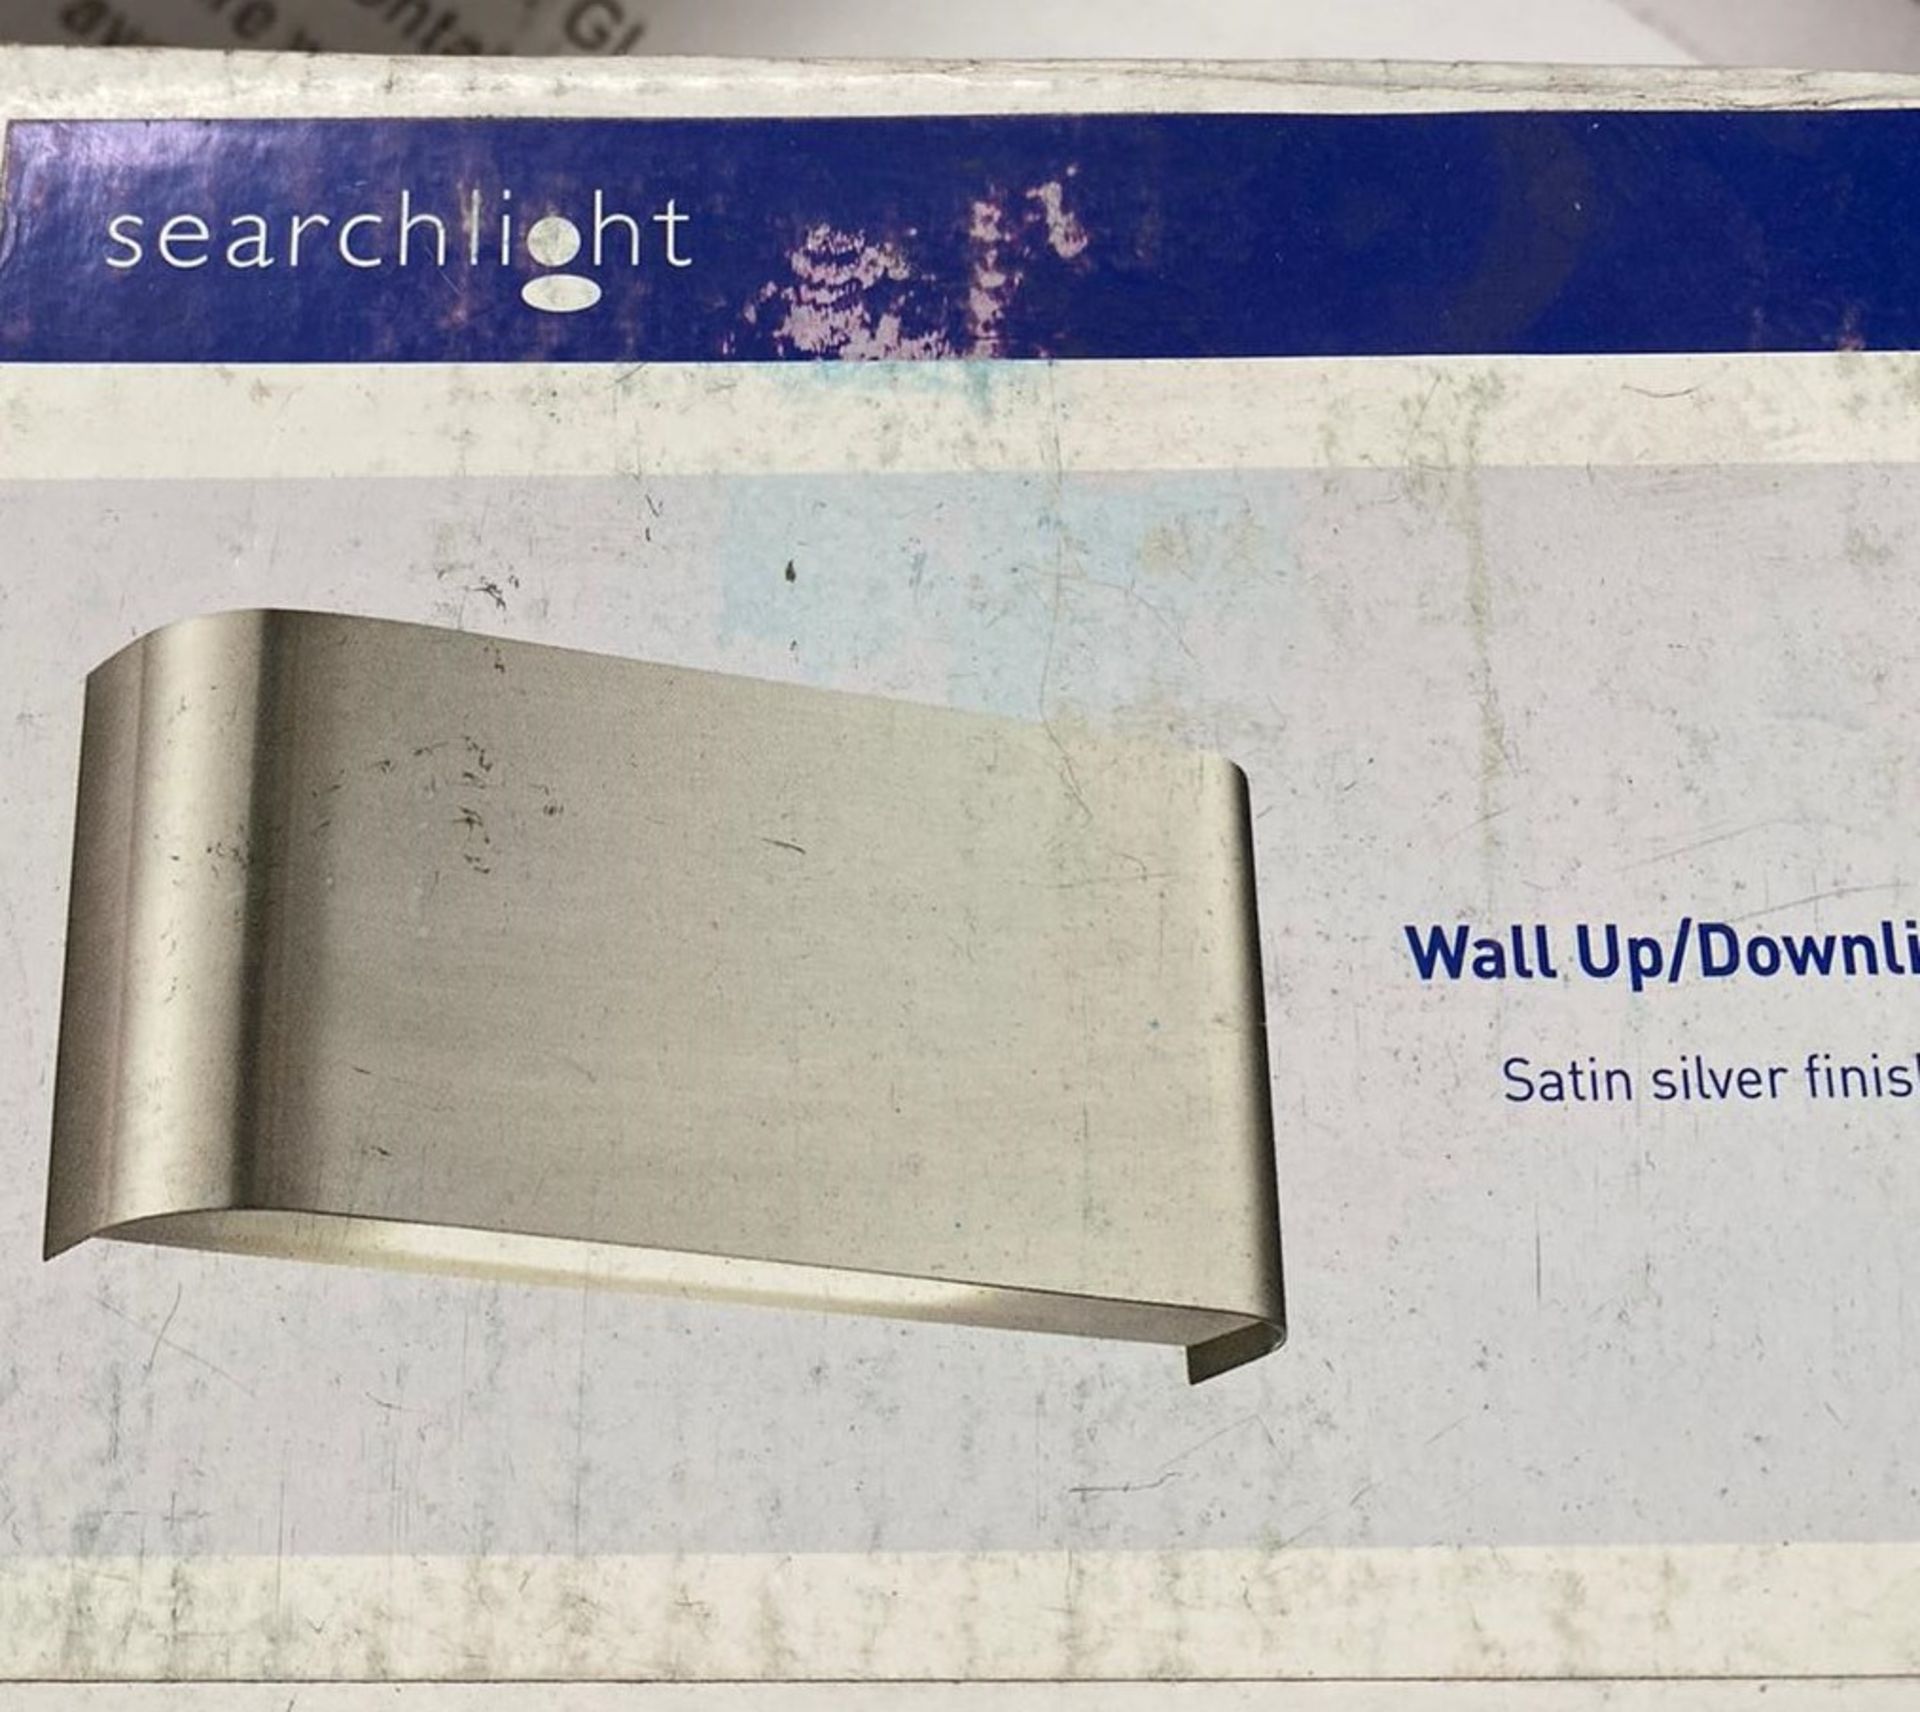 3 x Searchlight Wall Up/downlight in satin silver - Ref: 1953SS - New and Boxed - RRP: £105(each) - Image 4 of 4